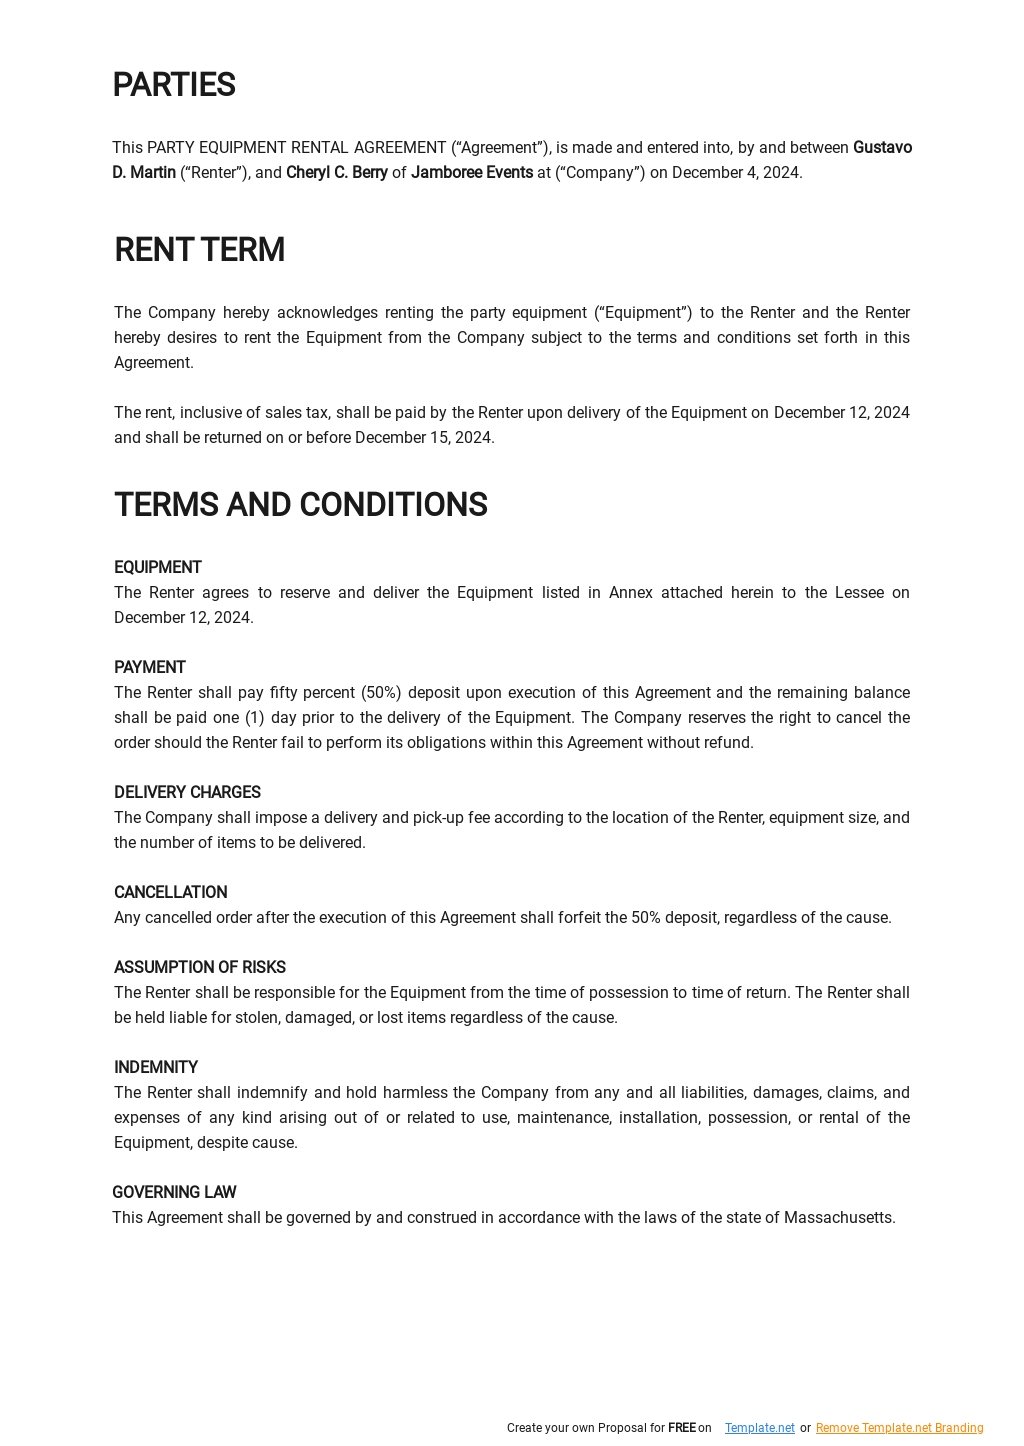 Party Equipment Rental Agreement Template in Google Docs Word